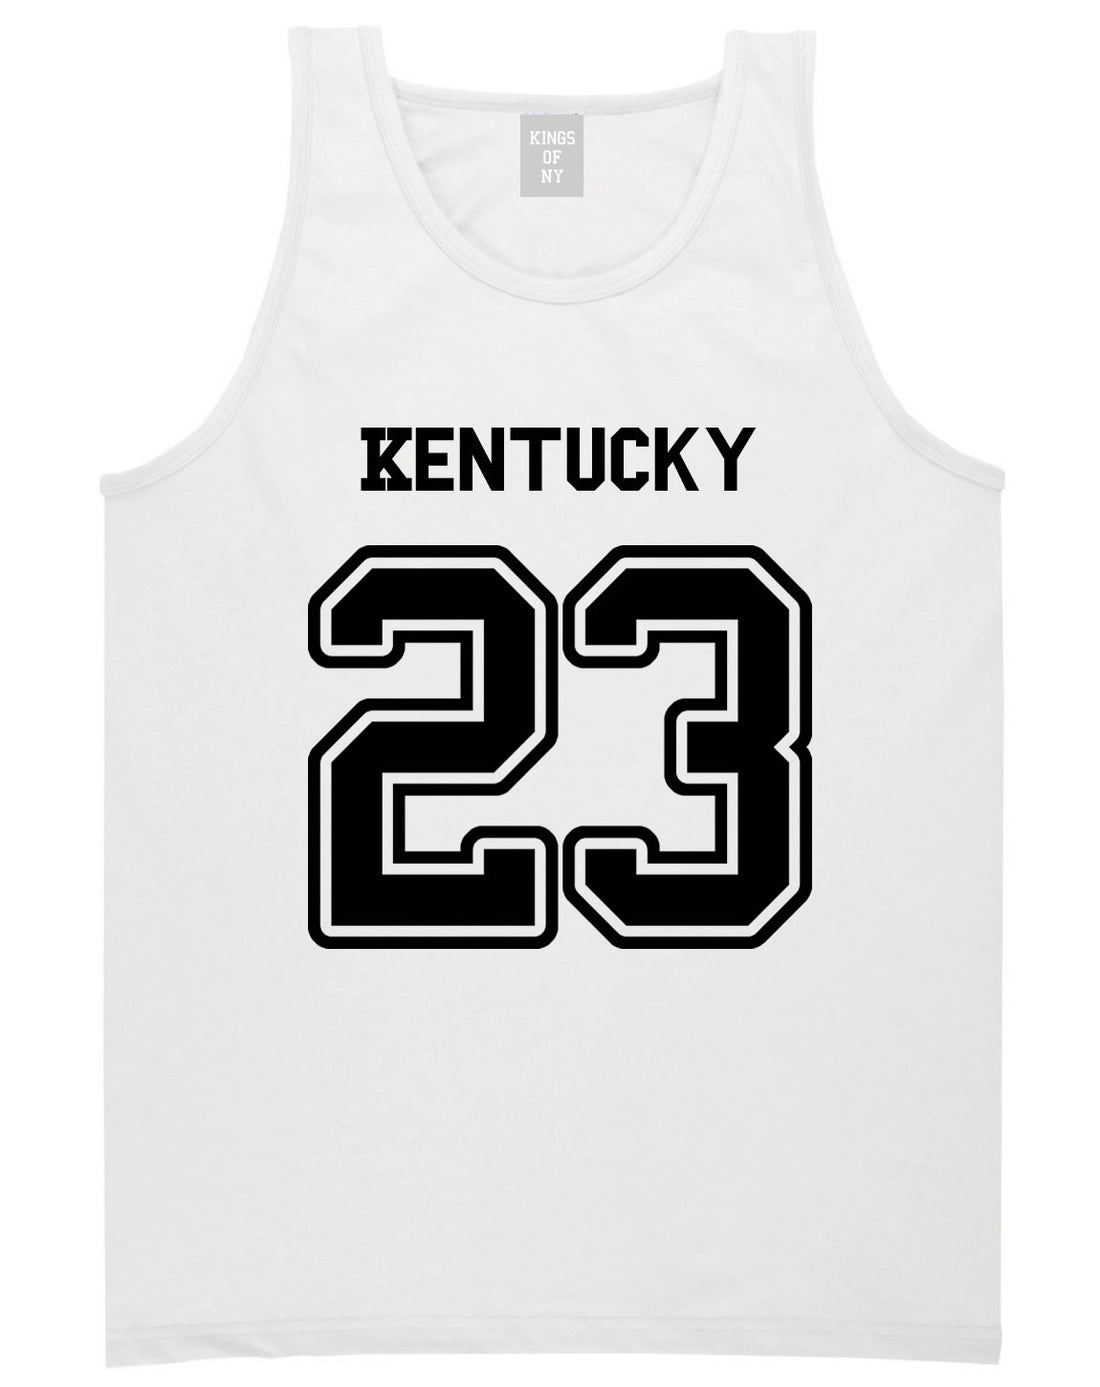 Sport Style Kentucky 23 Team State Jersey Mens Tank Top By Kings Of NY